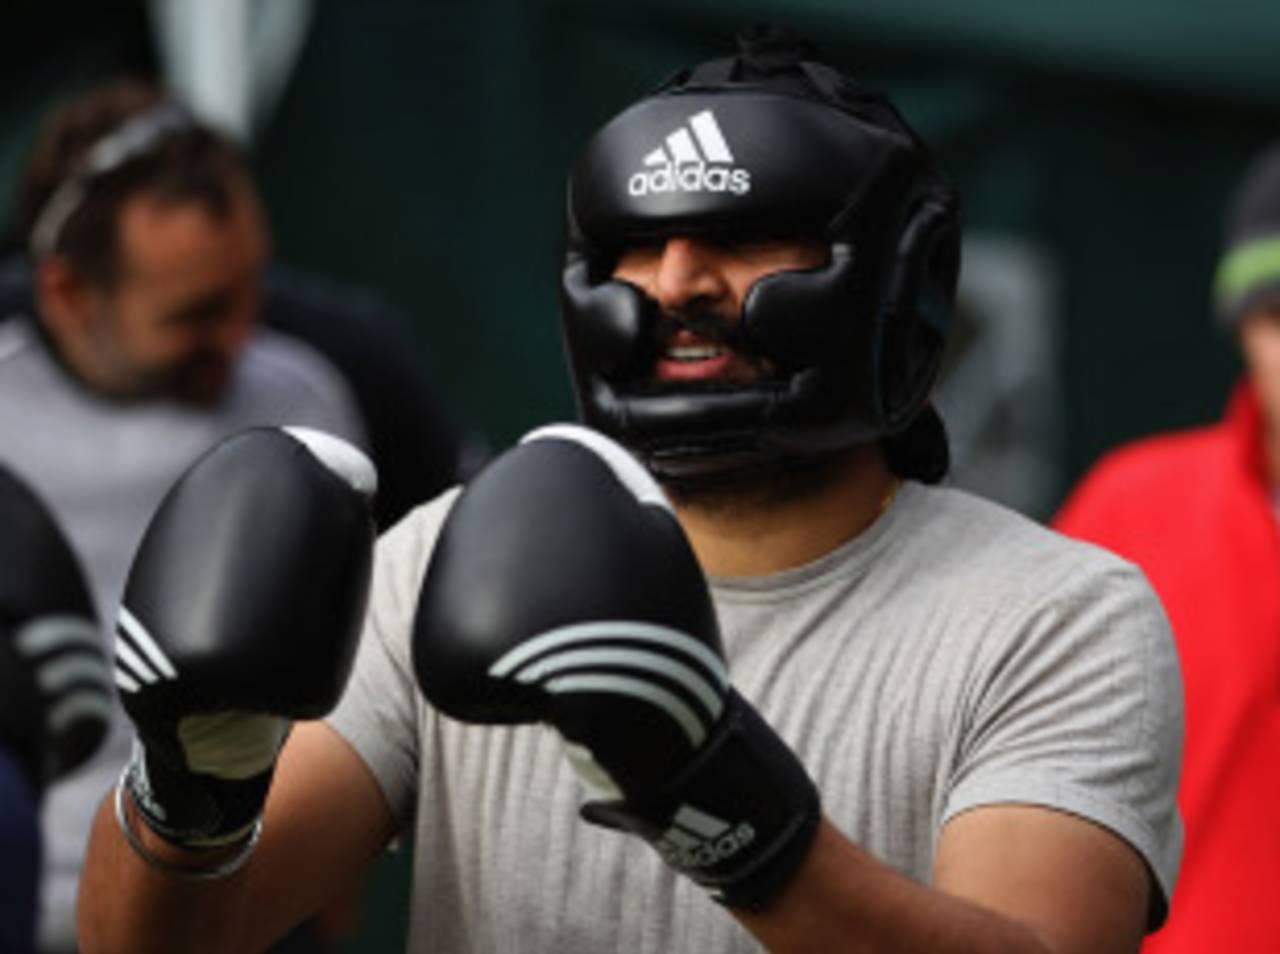 Monty Panesar takes part in one of England's boxing sessions&nbsp;&nbsp;&bull;&nbsp;&nbsp;Getty Images